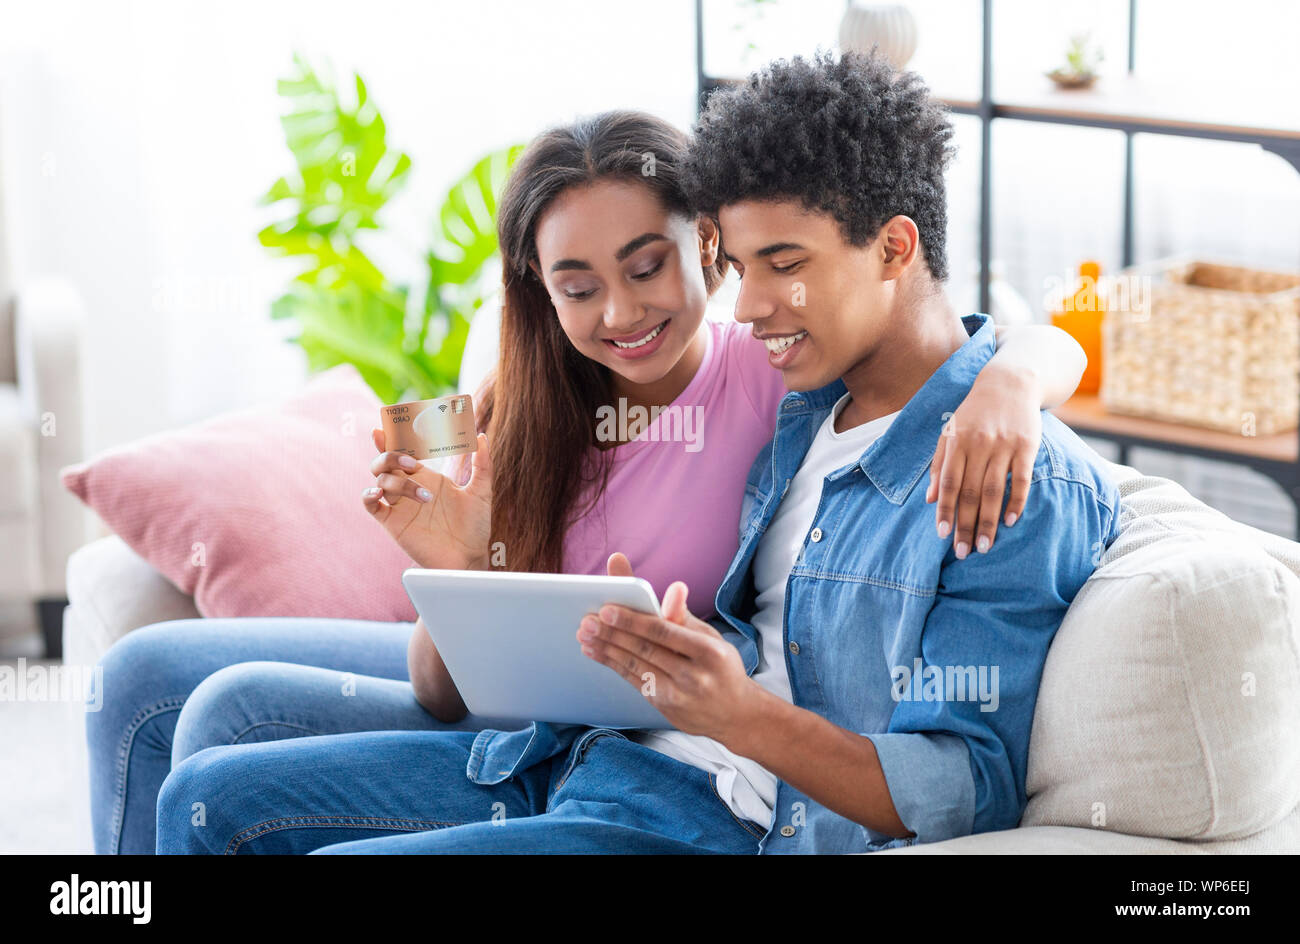 Teenage Couple Shopping Online Using Digital Tablet At Home Stock Photo